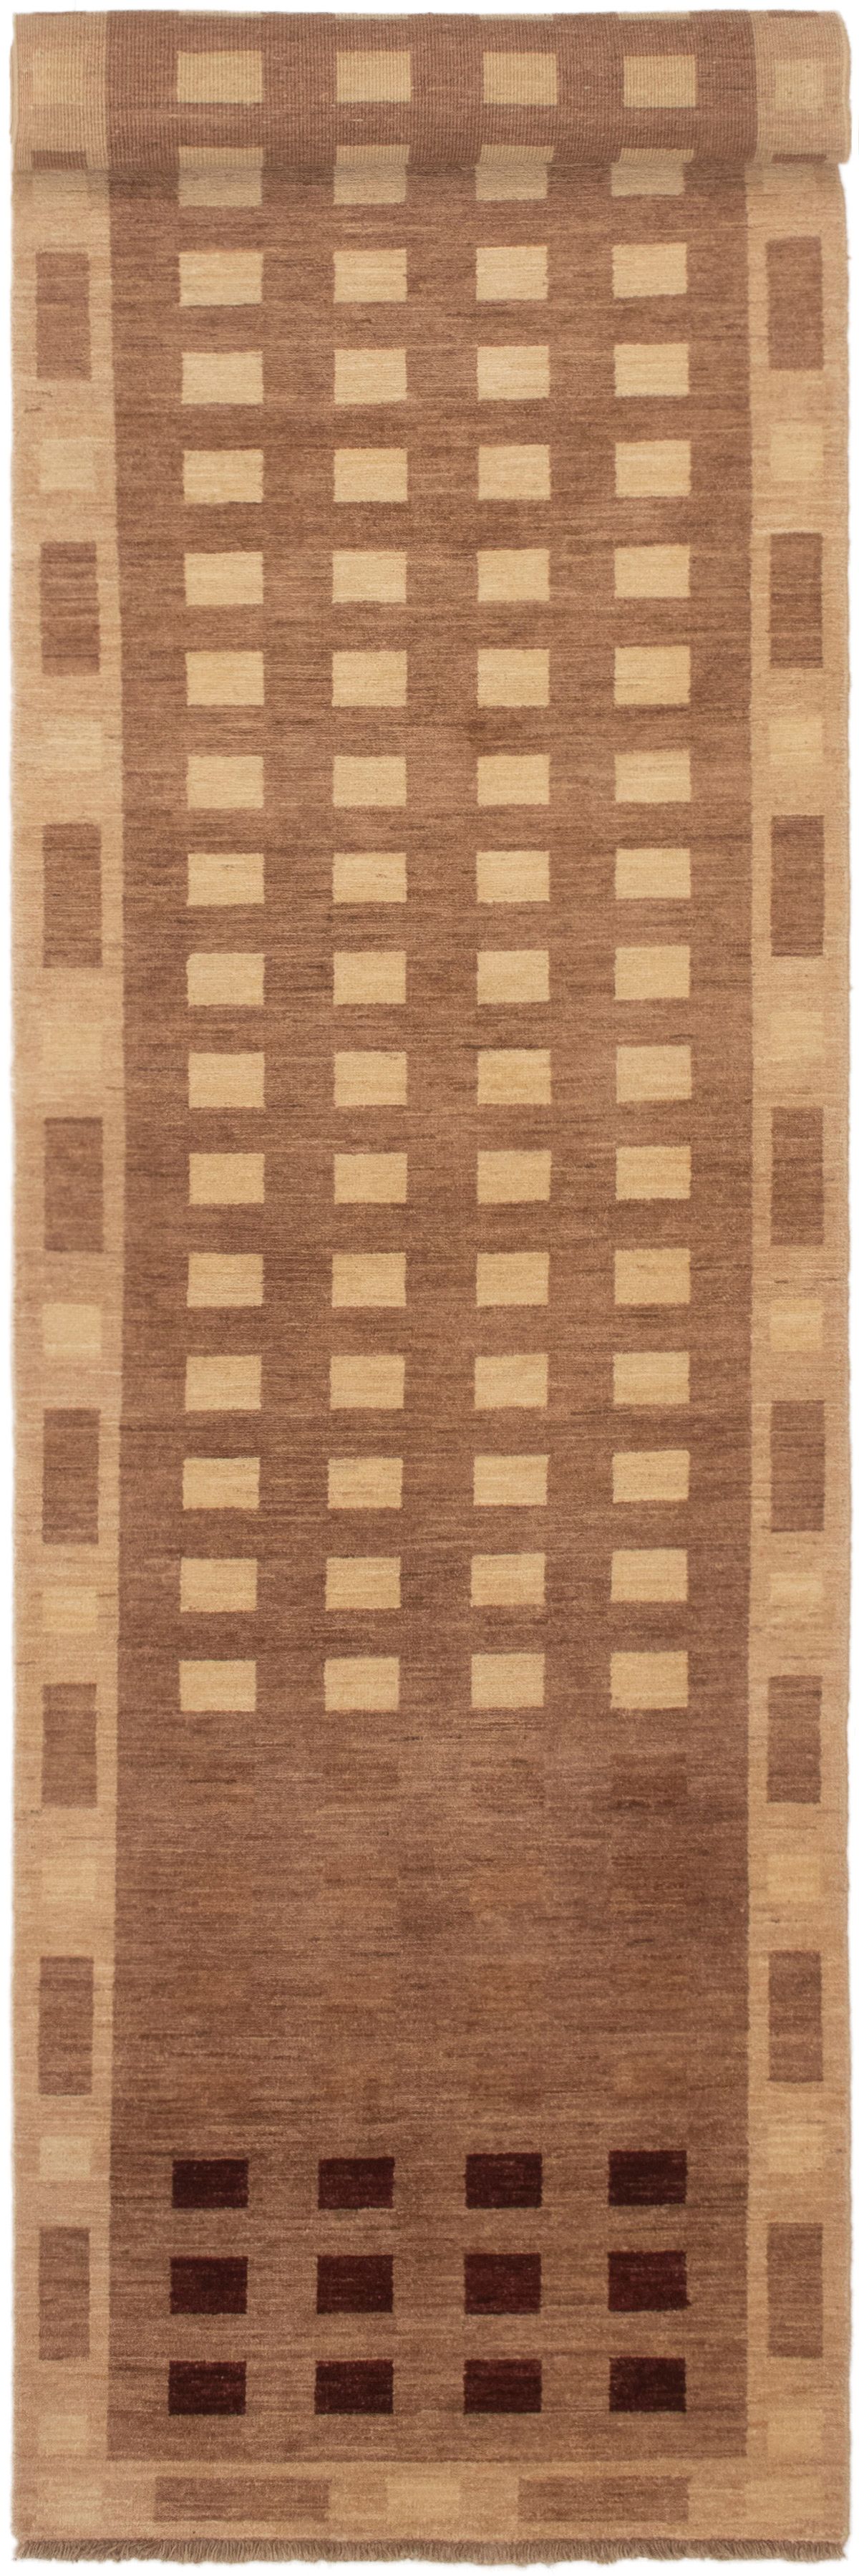 Hand-knotted Finest Ziegler Chobi Brown Wool Rug 2'9" x 15'1" Size: 2'9" x 15'1"  